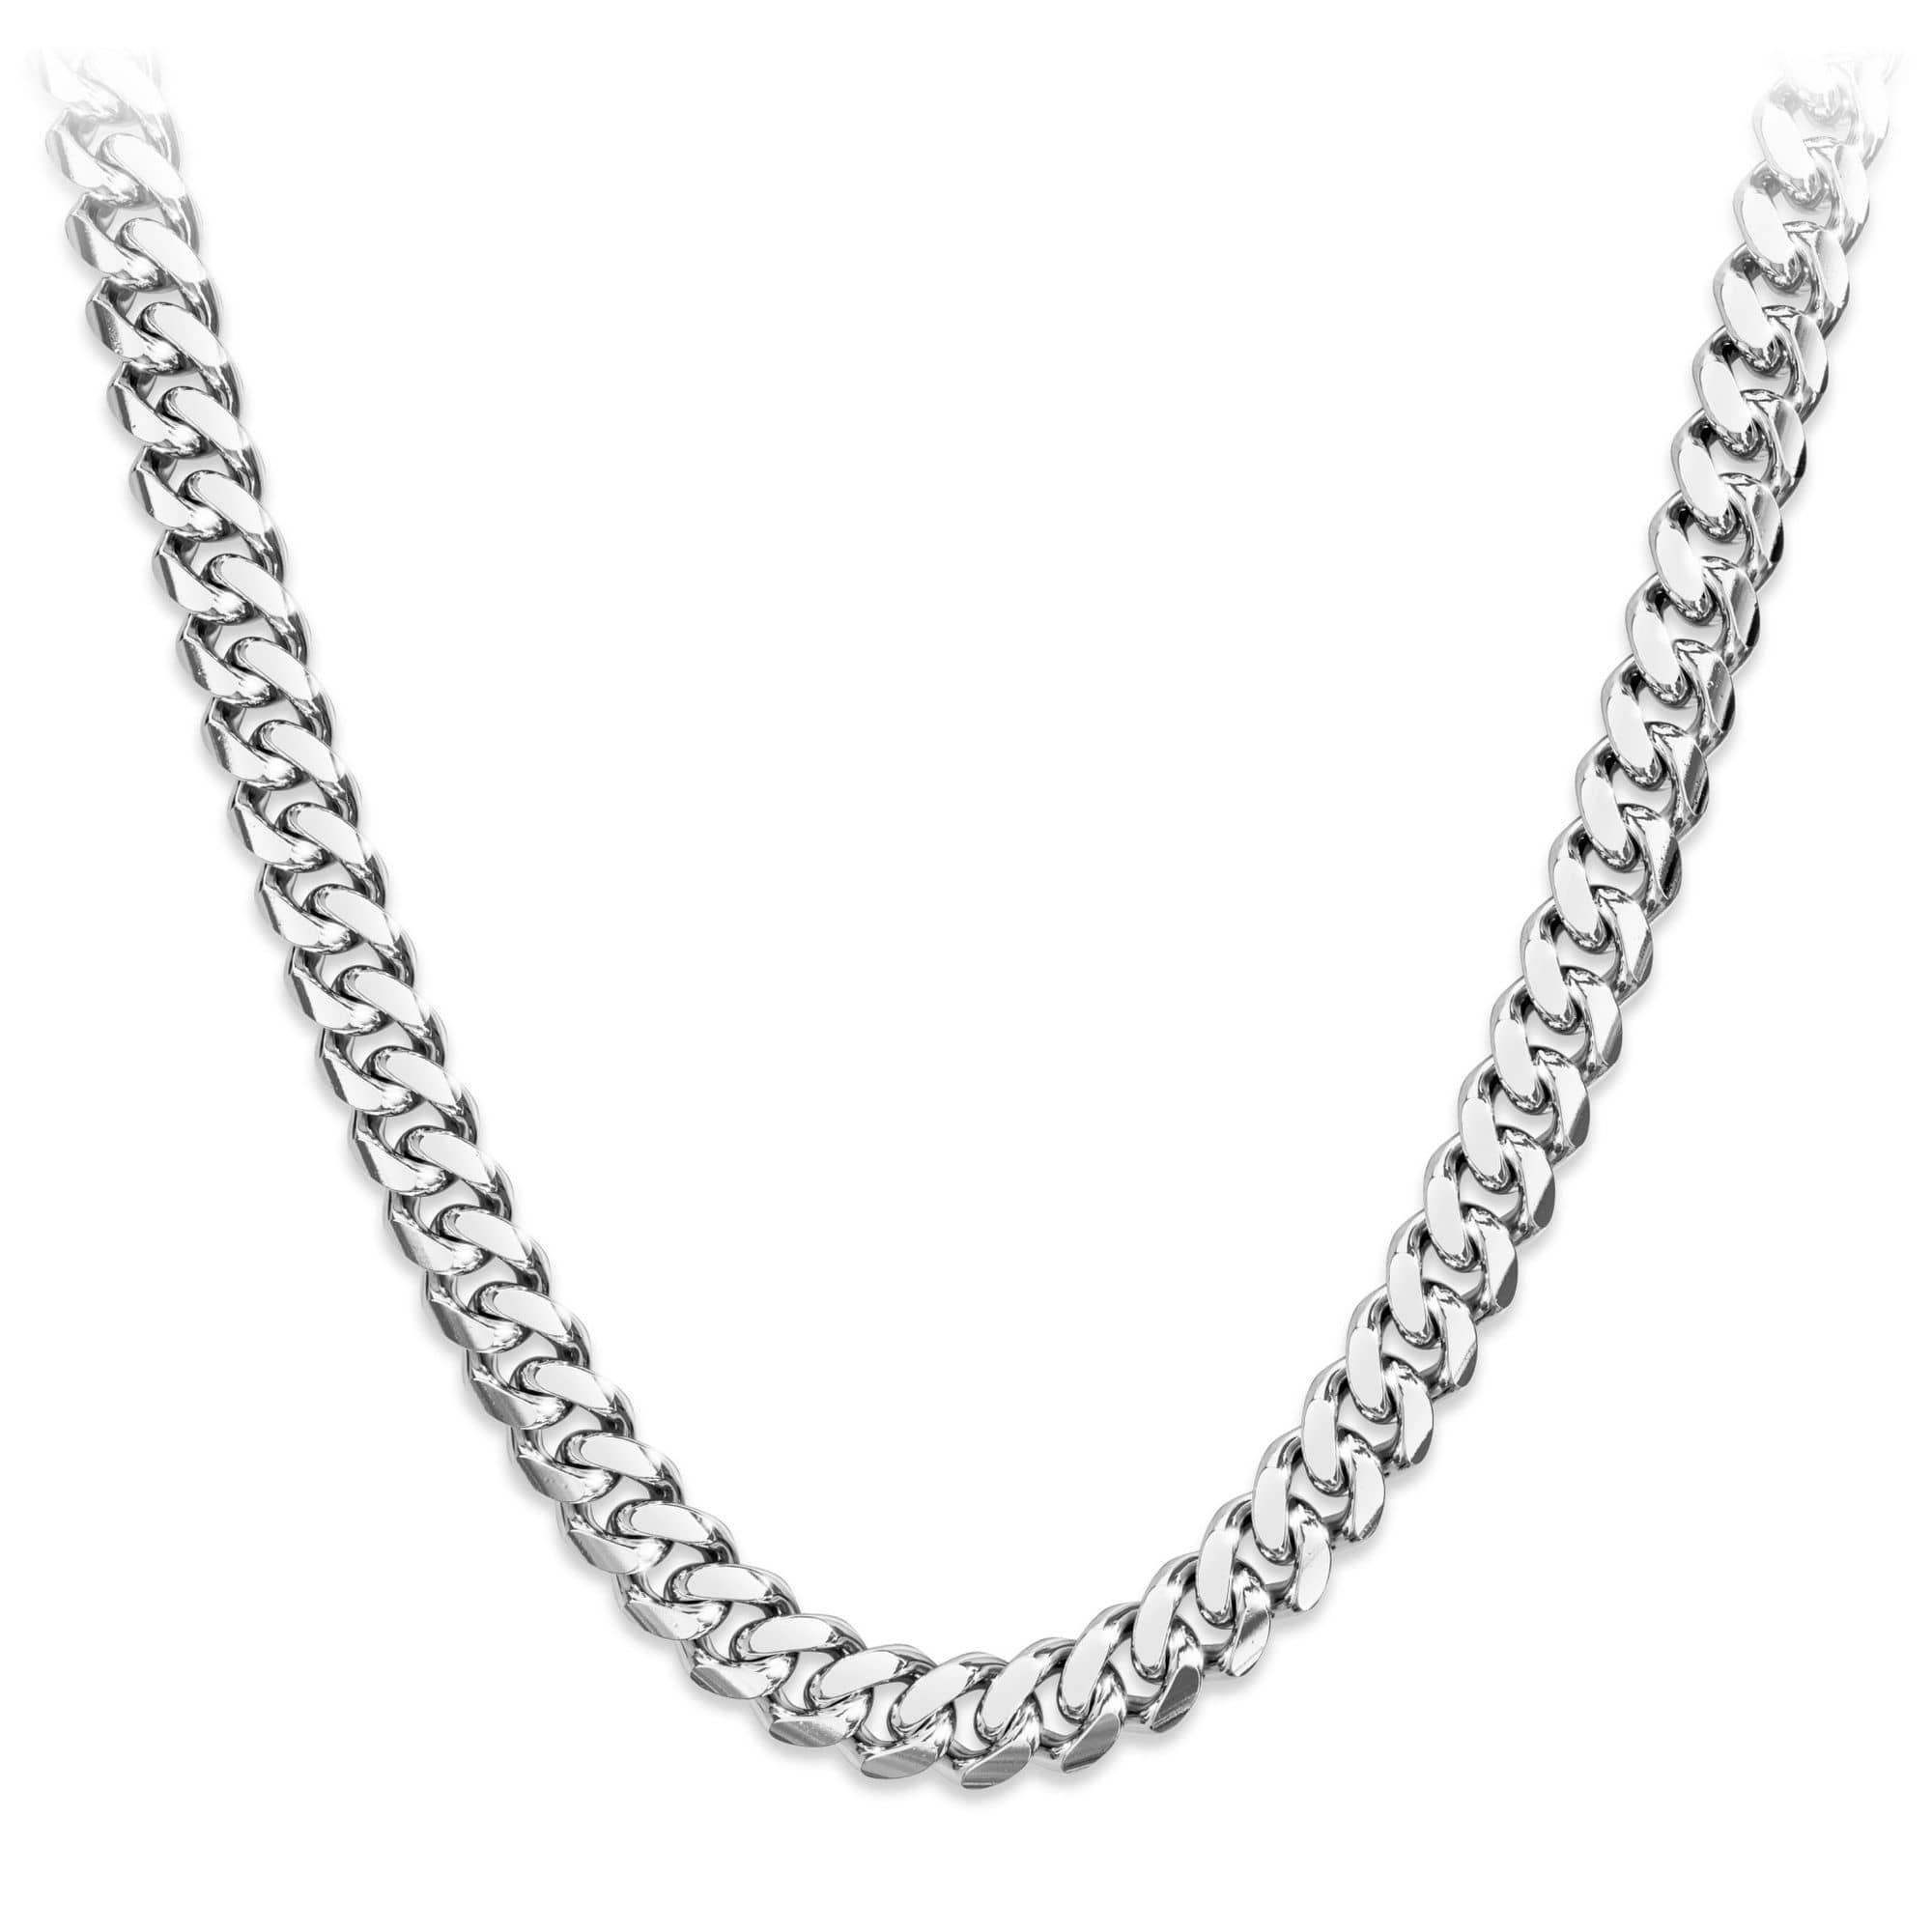 7mm Cuban Chain for Women | Silver Cuban Link Chain Necklace